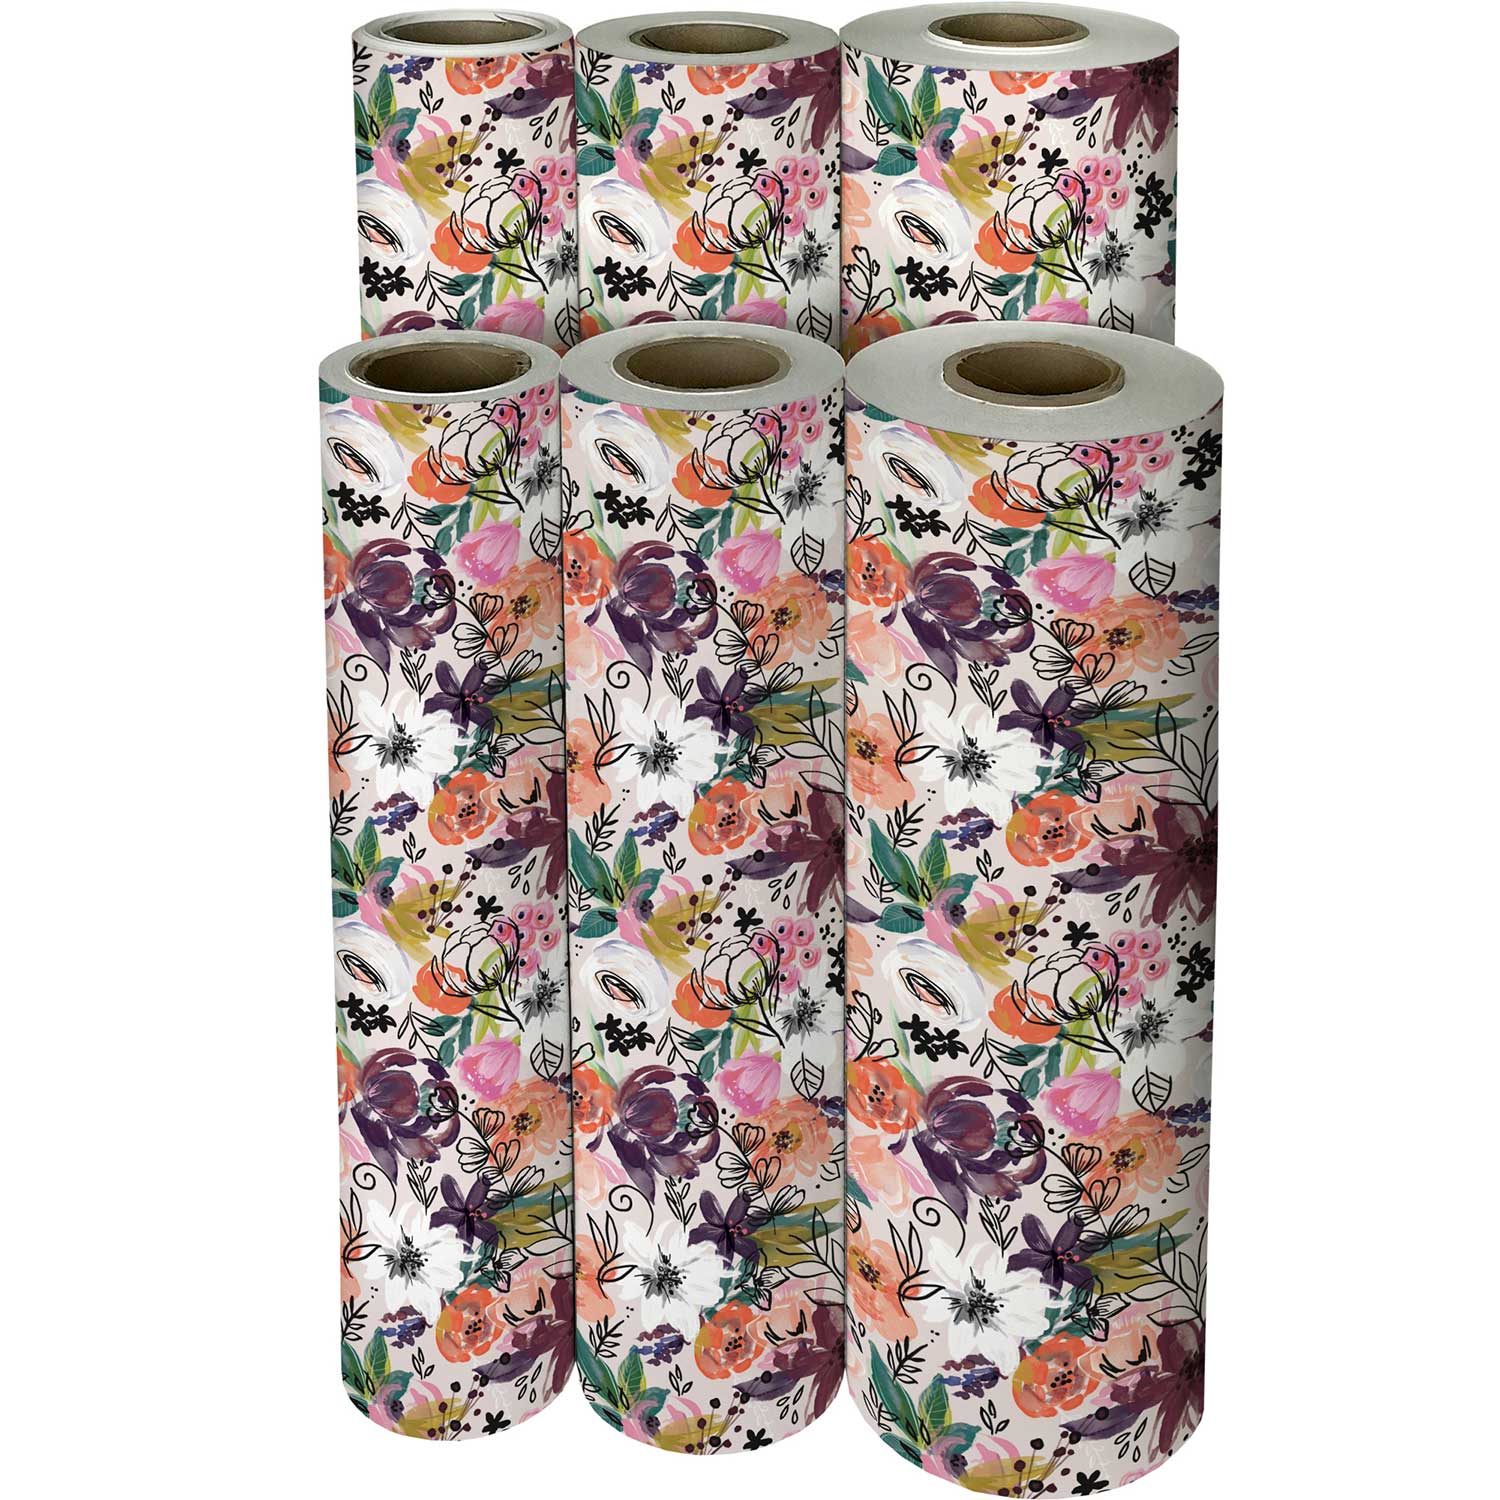 Pack of 5 Single Stem Flower Wrapping Paper for Gifting – Floral